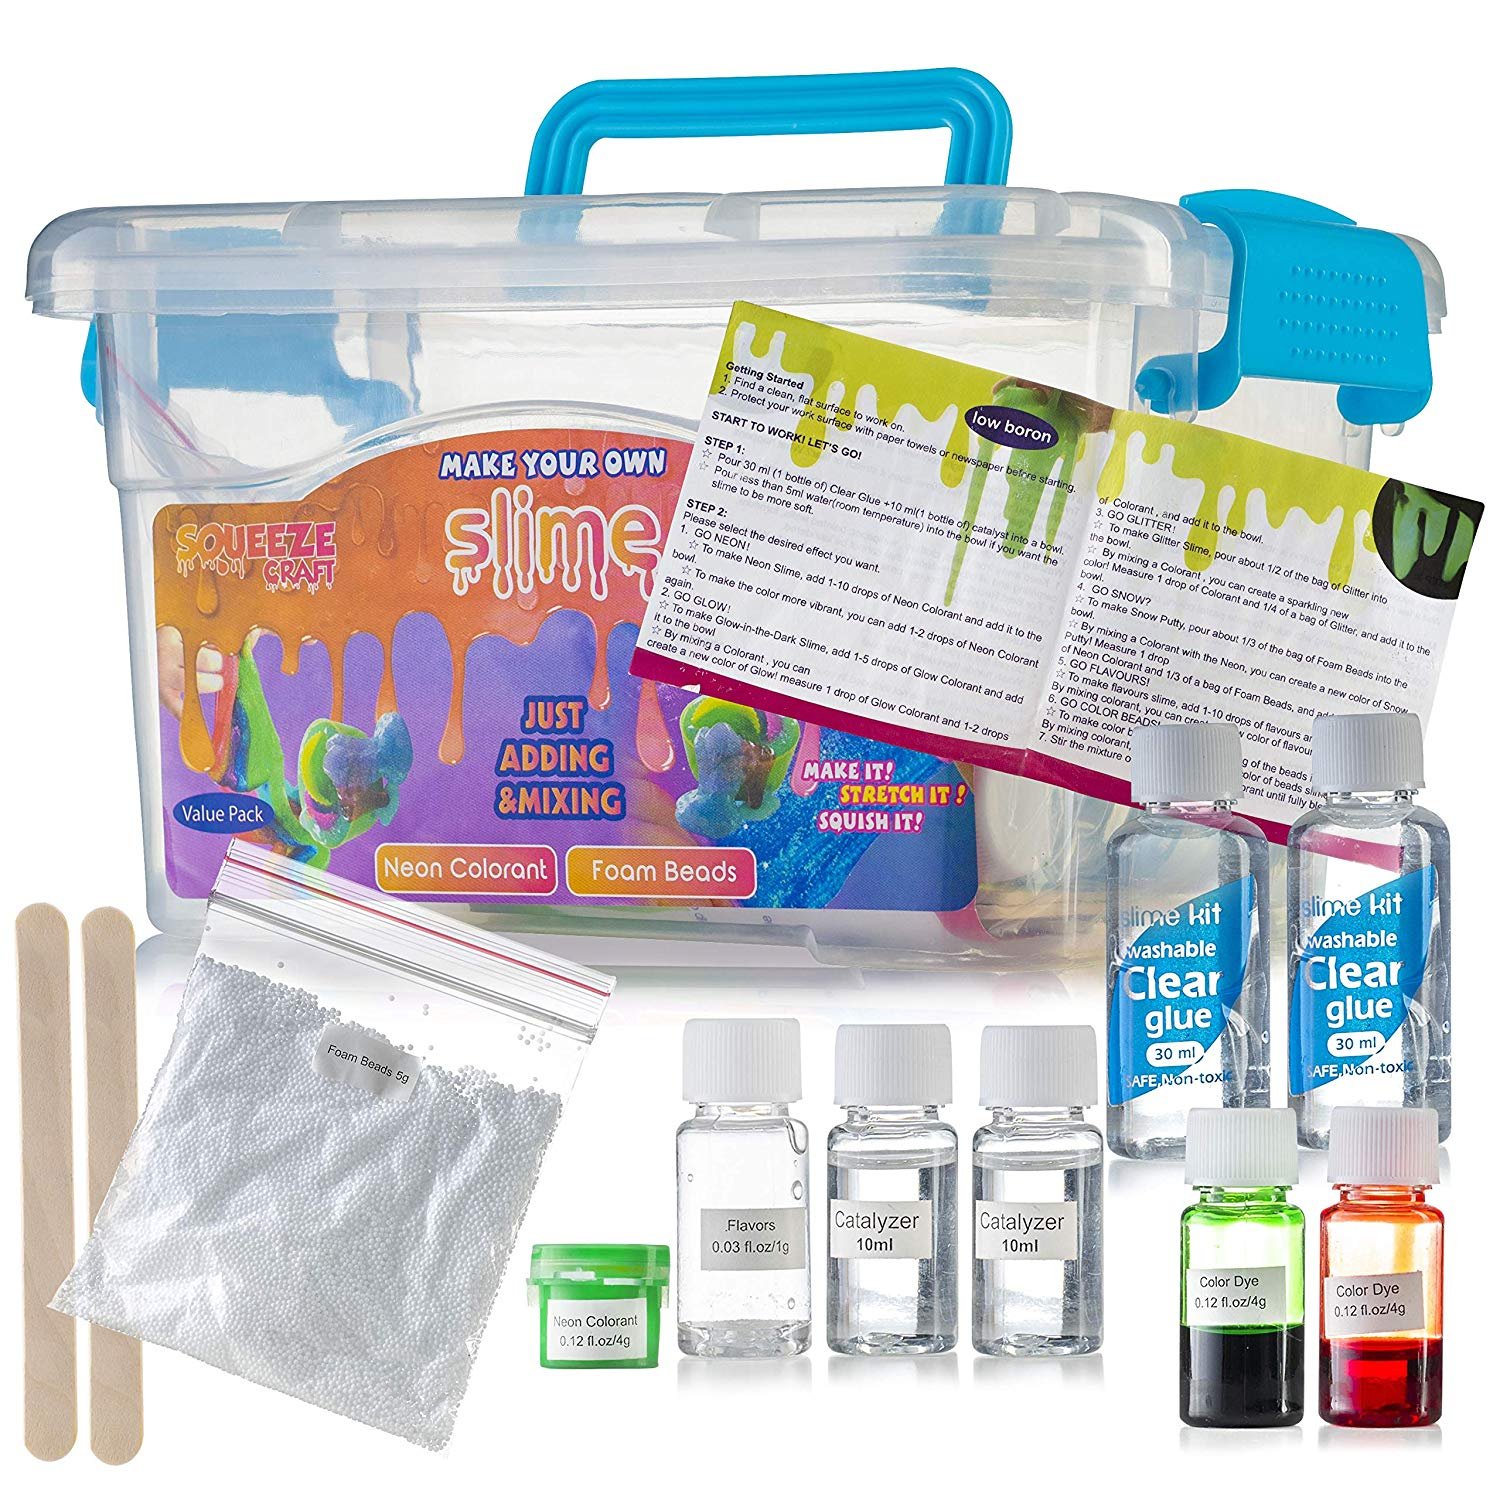 Make Your Own Slime Kit - Double Pack, Neon Foam Beads and Neon